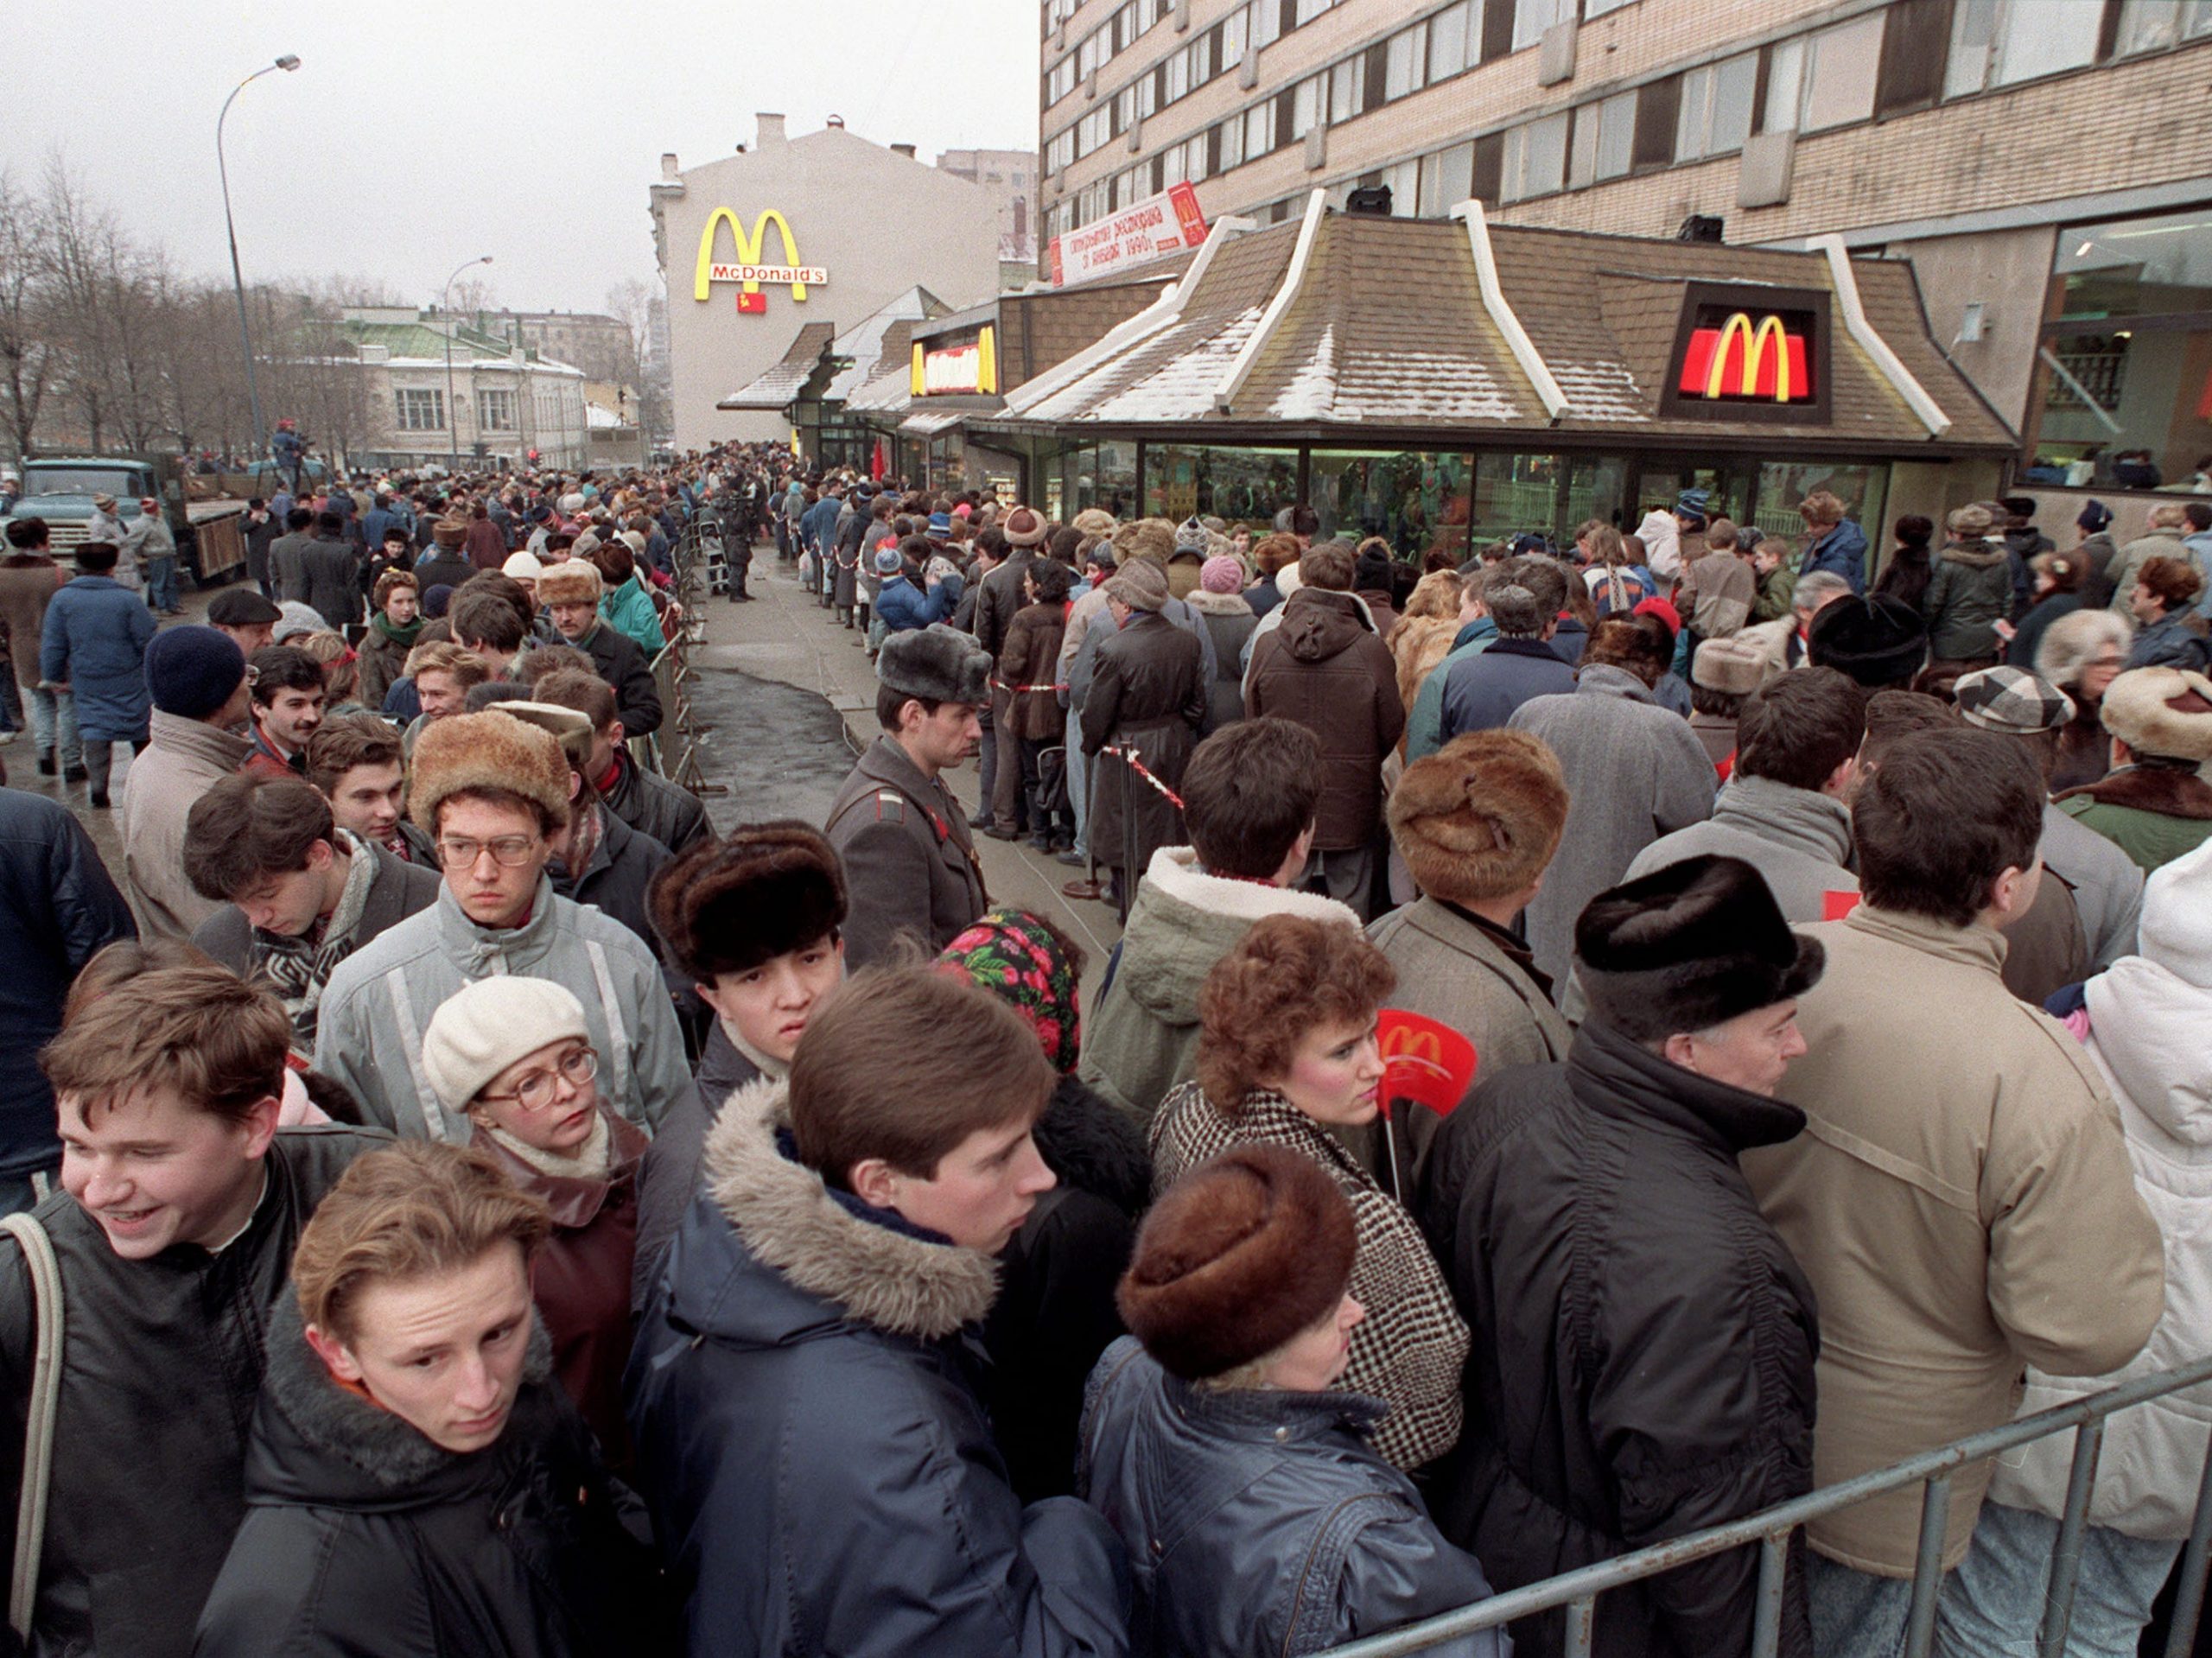 People seen lining up on the opening day of Russia's first McDonald's outlet, located in Moscow's Pushkin Square, on January 31, 1990.